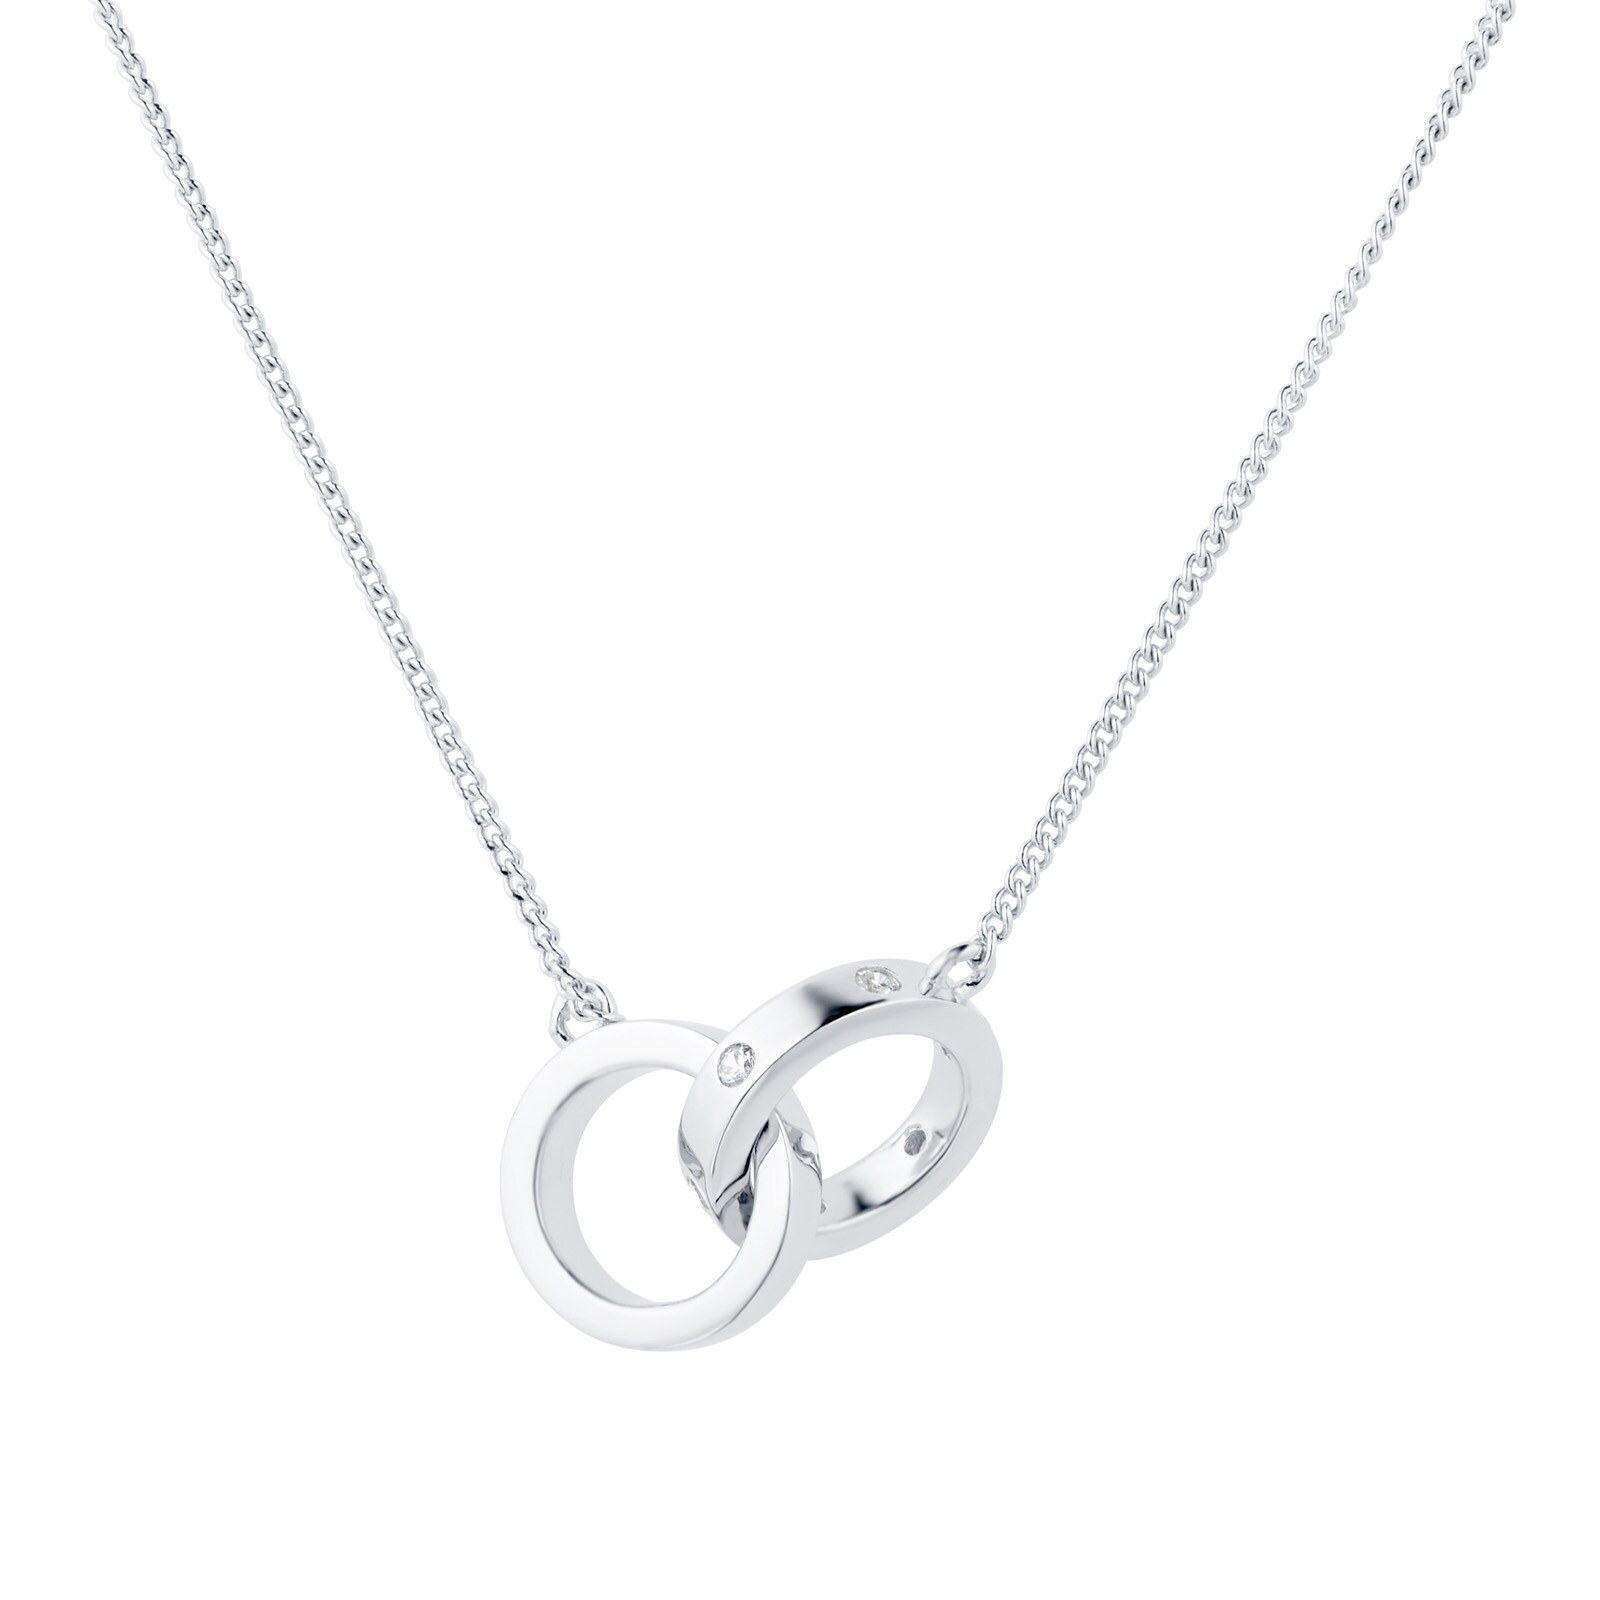 Silver Cubic Zirconia Station Necklace